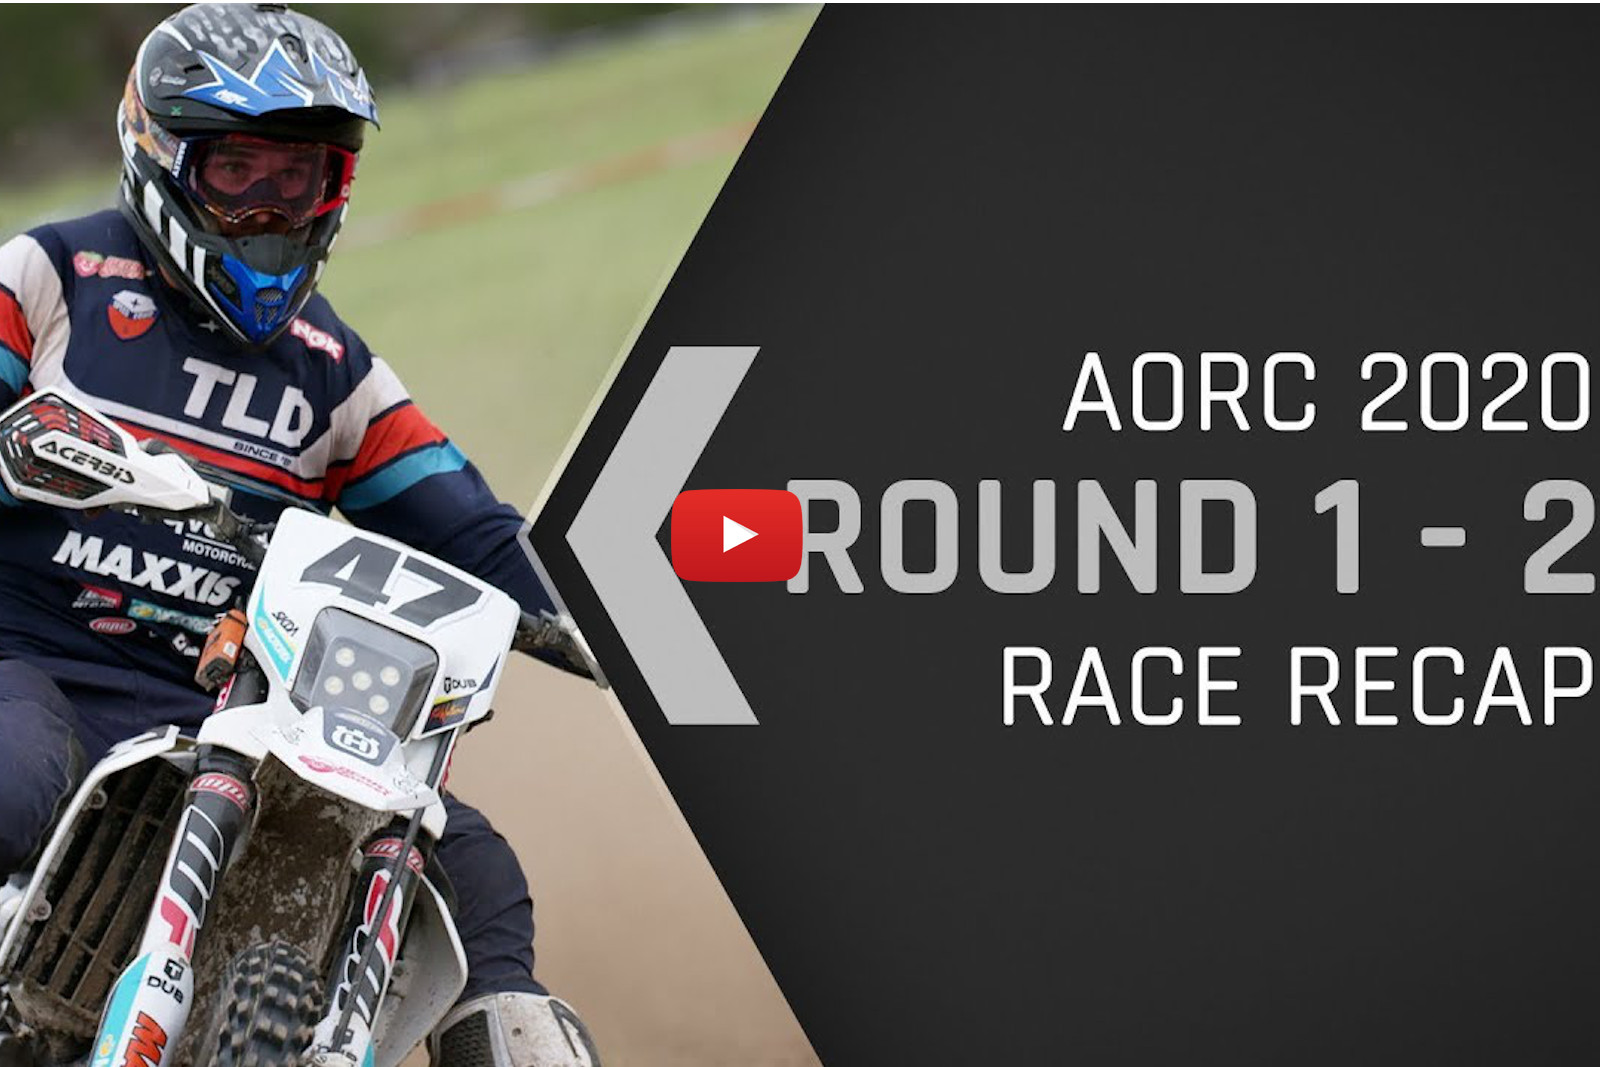 Video: 2020 AORC rounds 1 & 2 highlights 